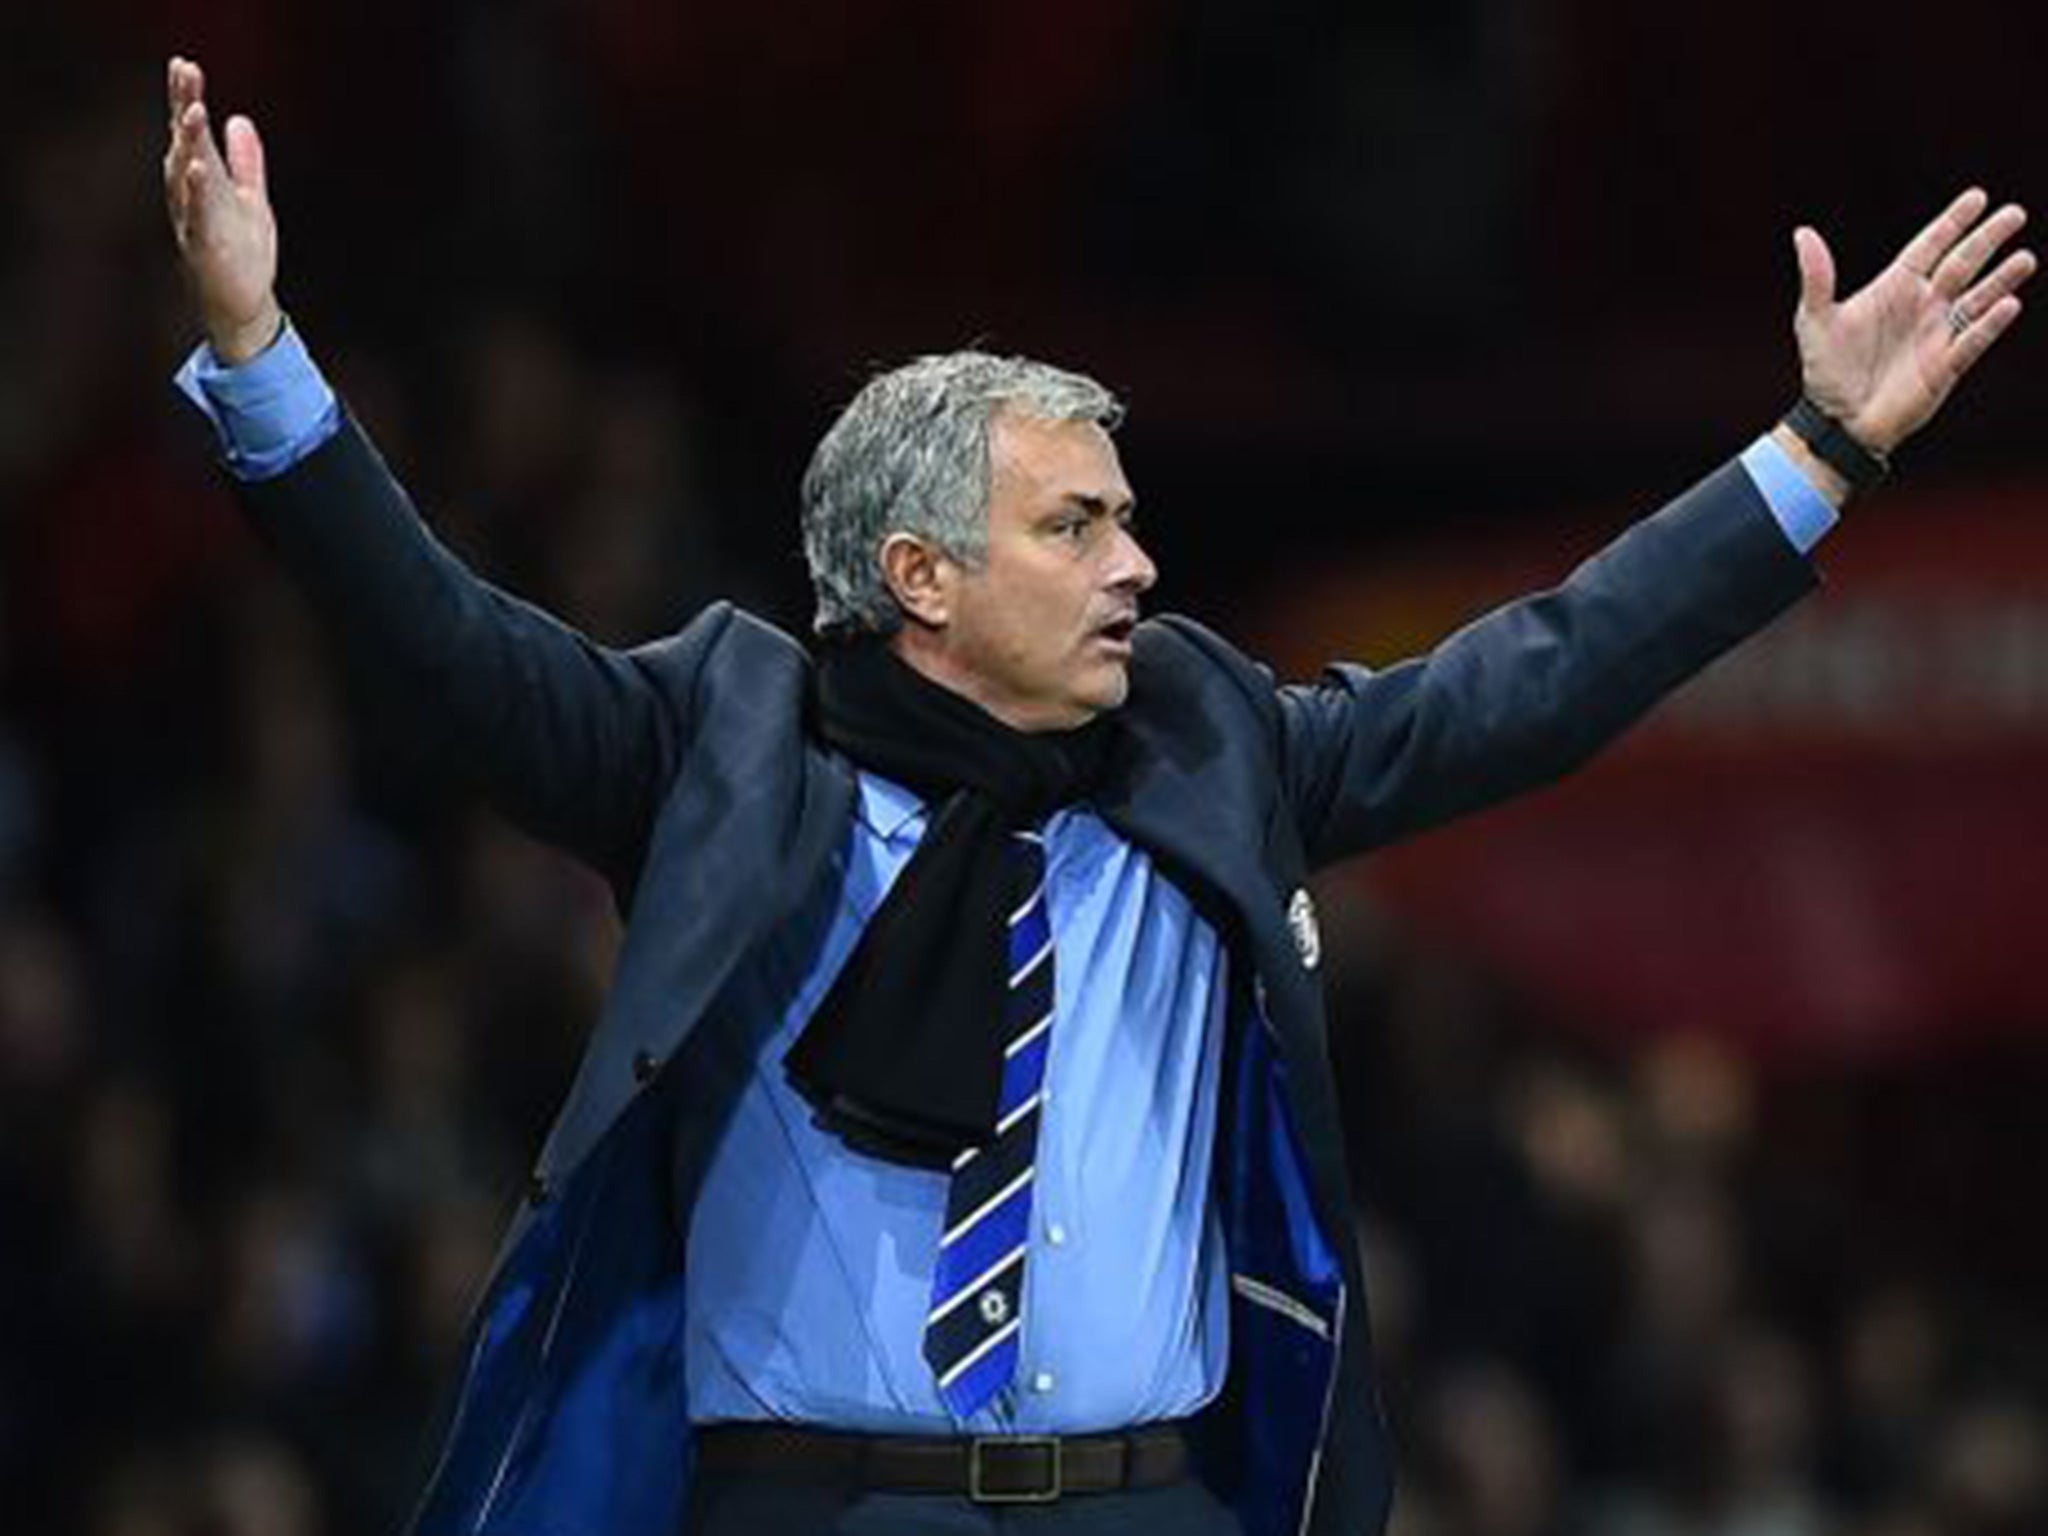 The majority of Chelsea supporters backed Mourinho to the very end